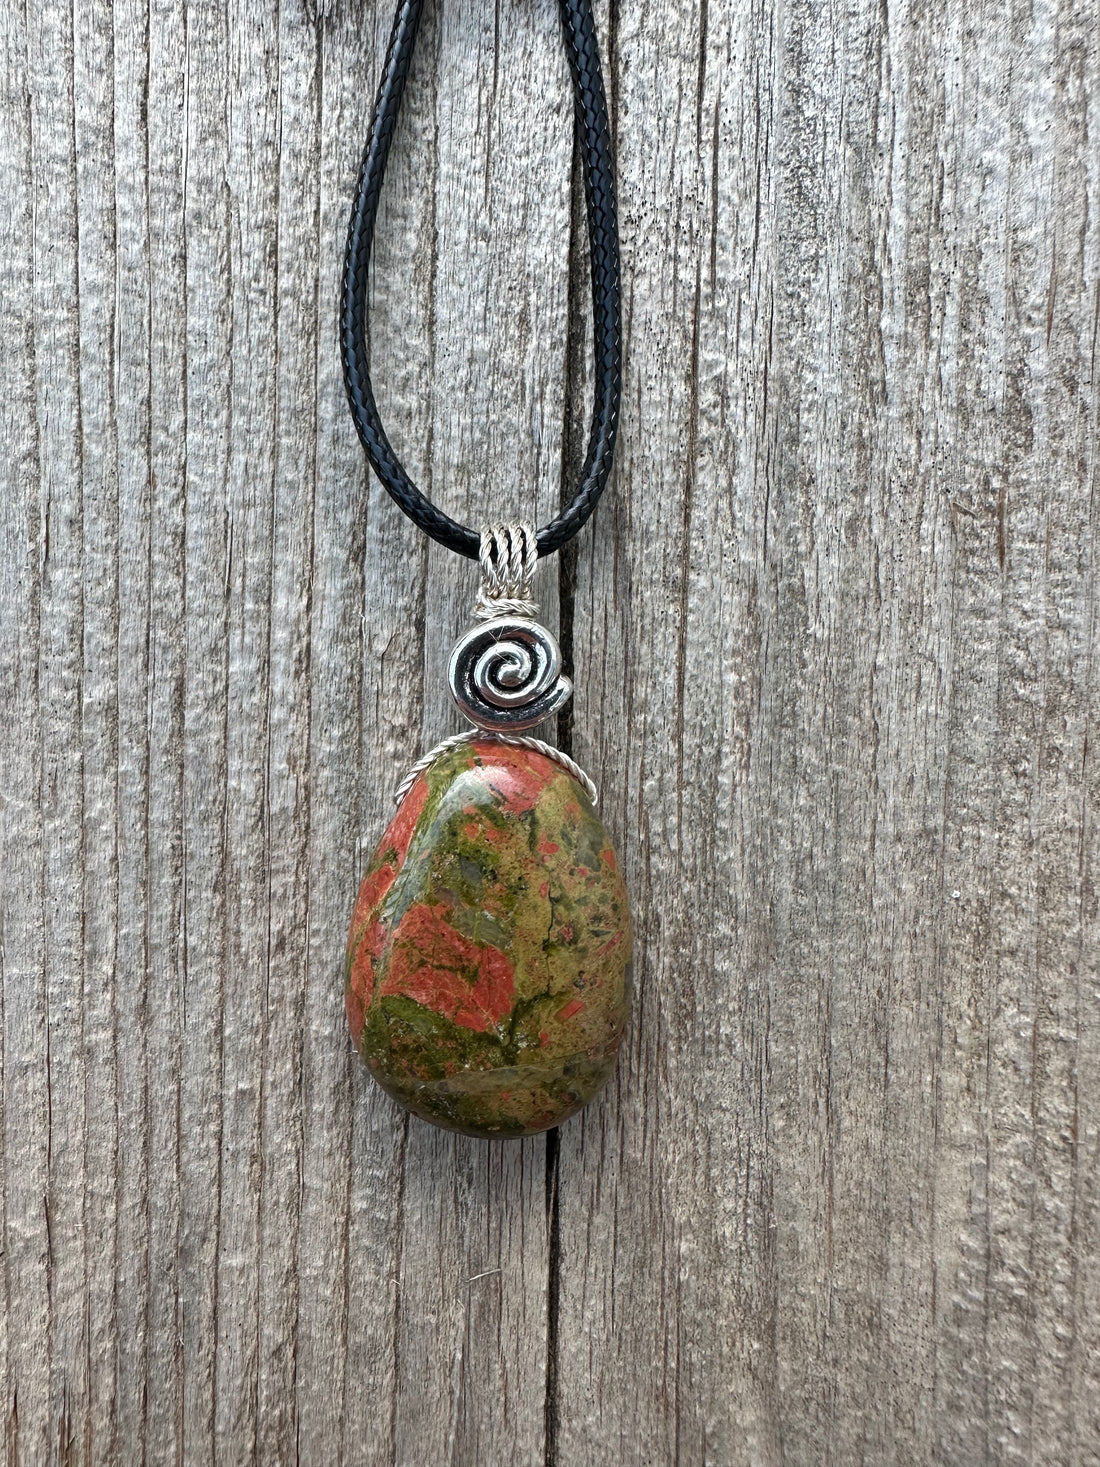 Unakite Necklace for Balance and Rebirth